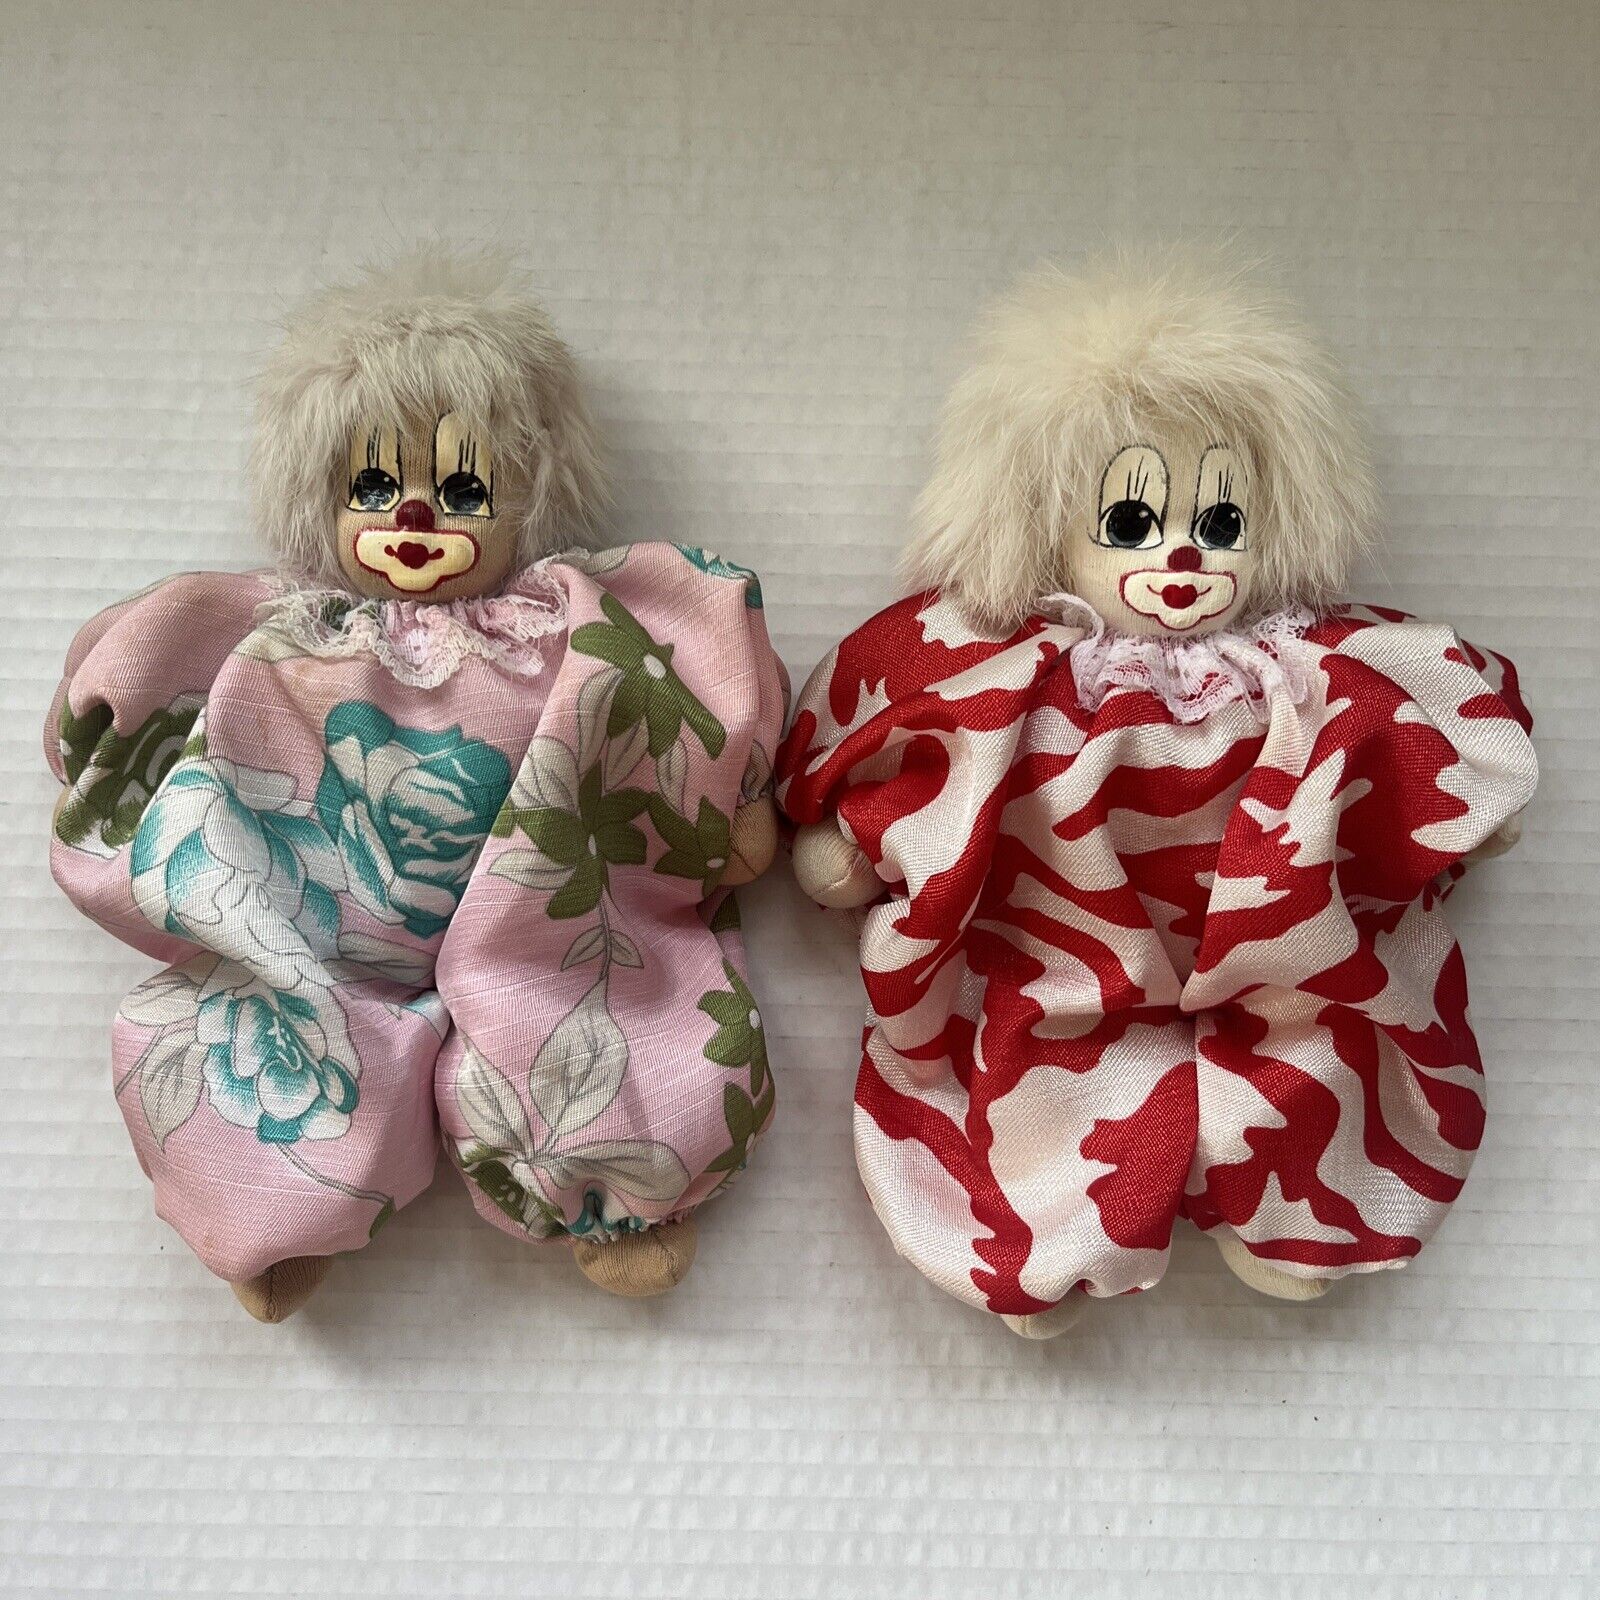 Vintage Q-Tee Clown 1980s Sand Doll Hand Made Hand Painted Lot of 2 Fur Hair 80s